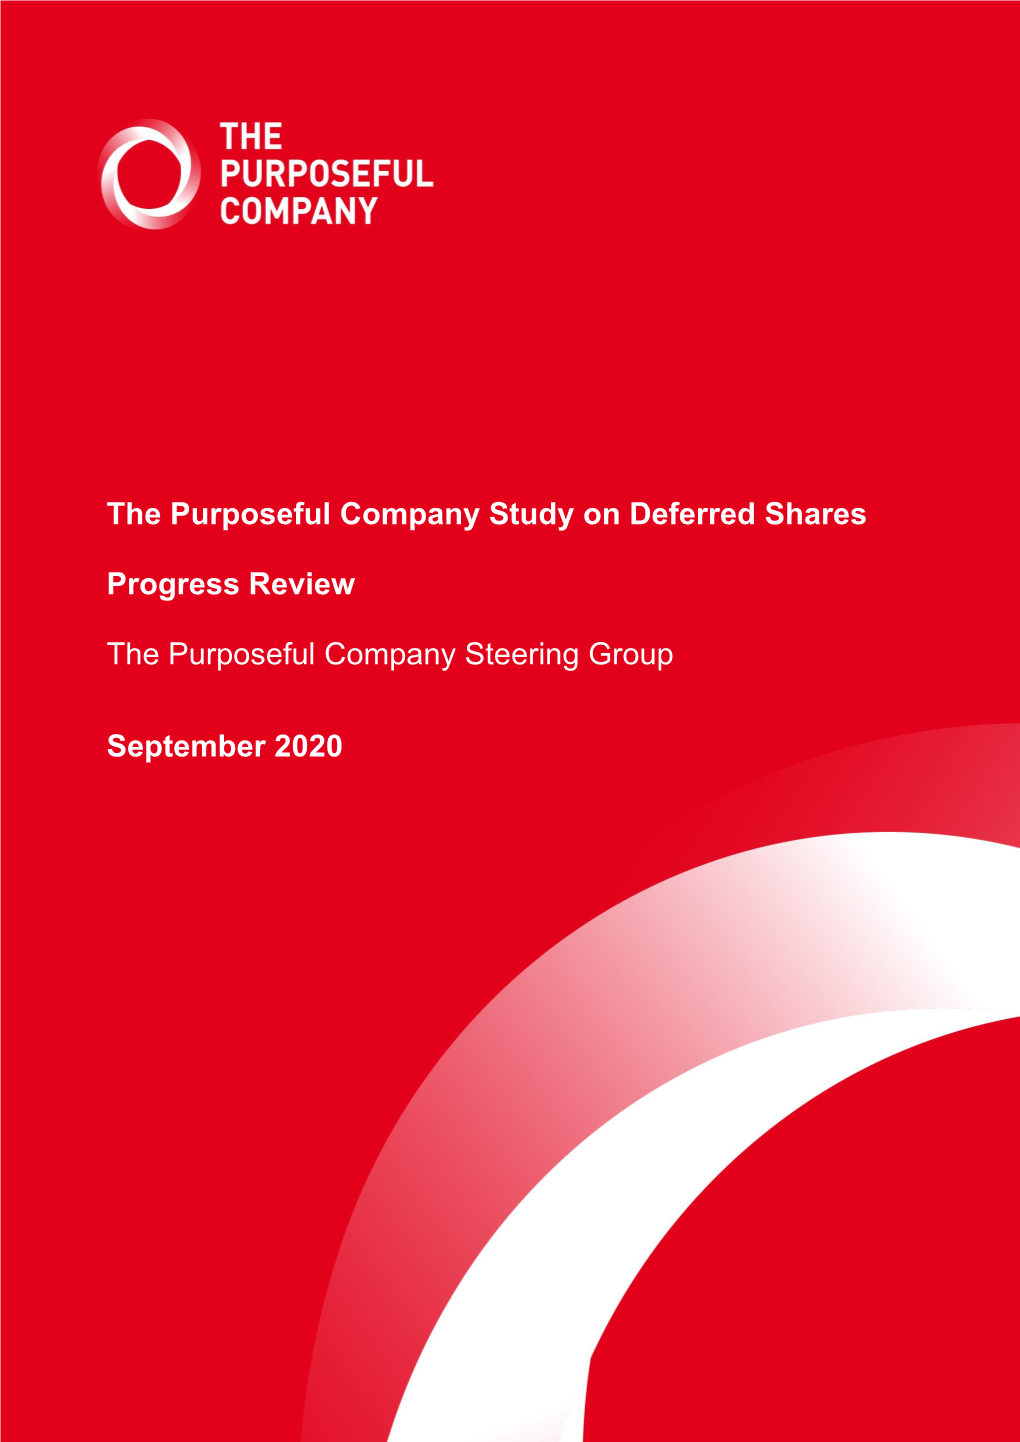 Study on Deferred Shares Progress Review